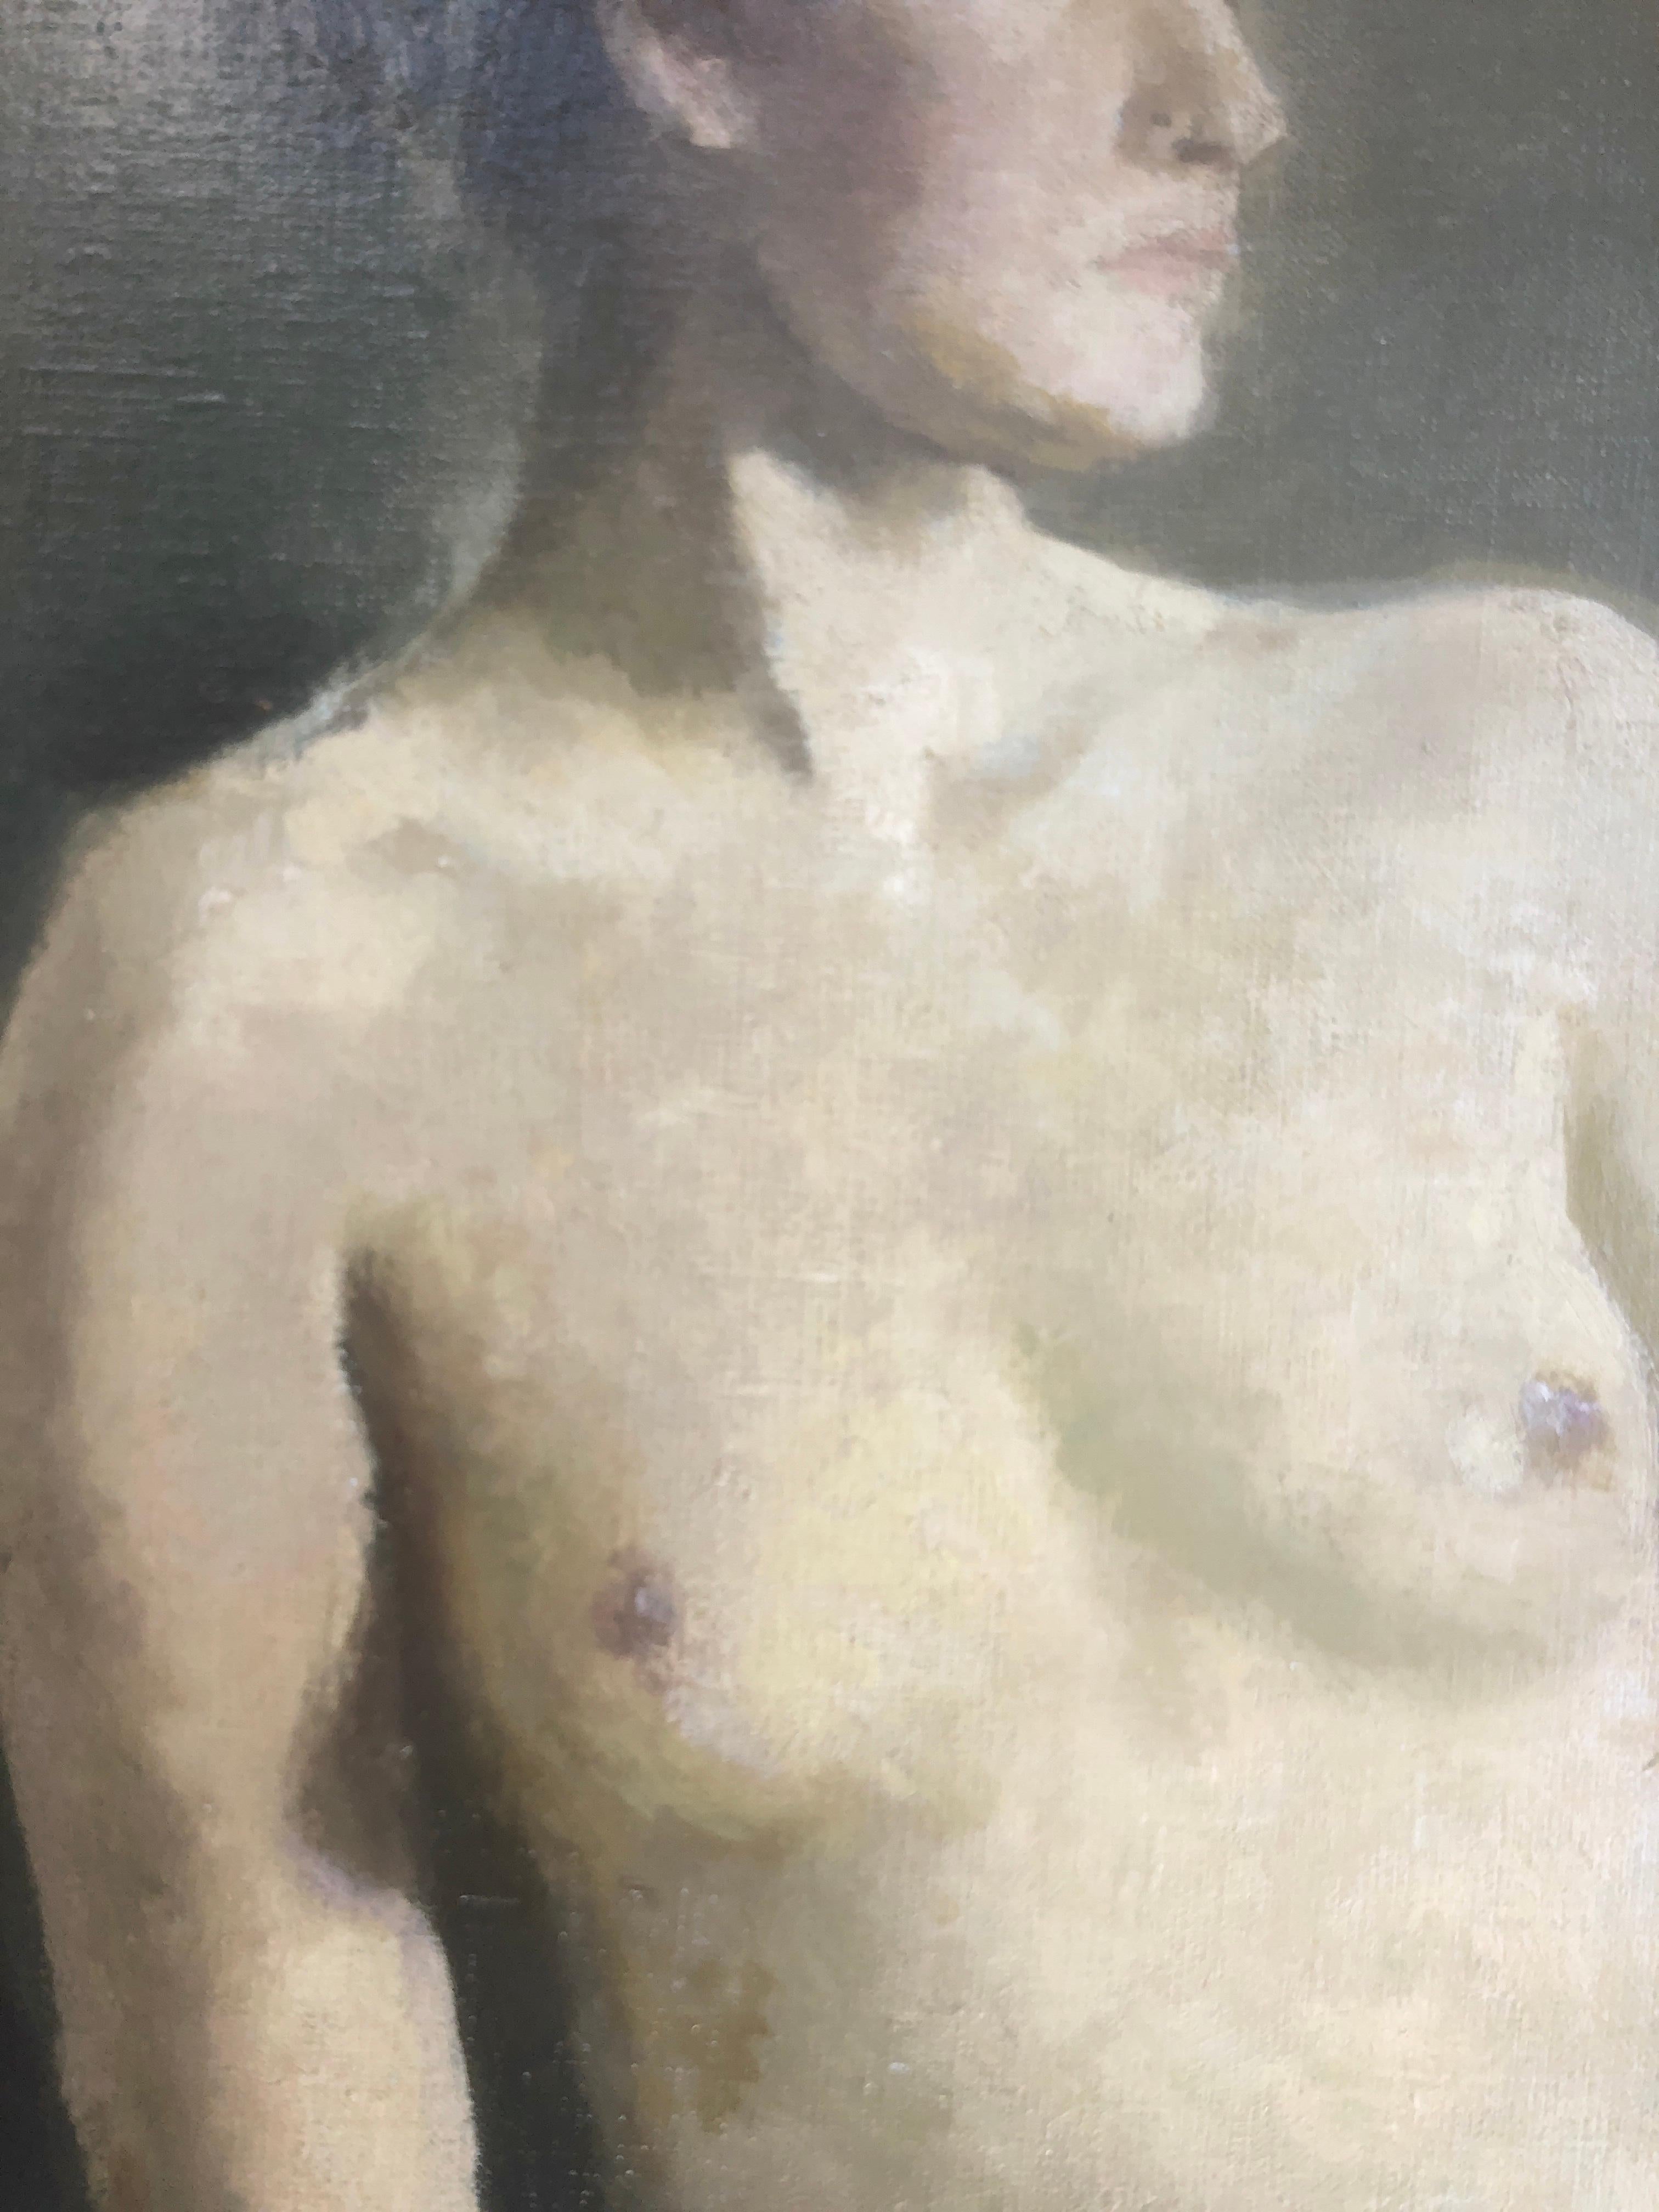 Francesc Serra Castellet (1912-1976) - Female nude - Oil on canvas
Oil measurements 73x54 cm.
Frameless.

Biography:

Francesc Serra Castellet. Barcelona 1912 - Tossa de Mar (Girona) 1976.
This Catalan painter spent his childhood and youth in